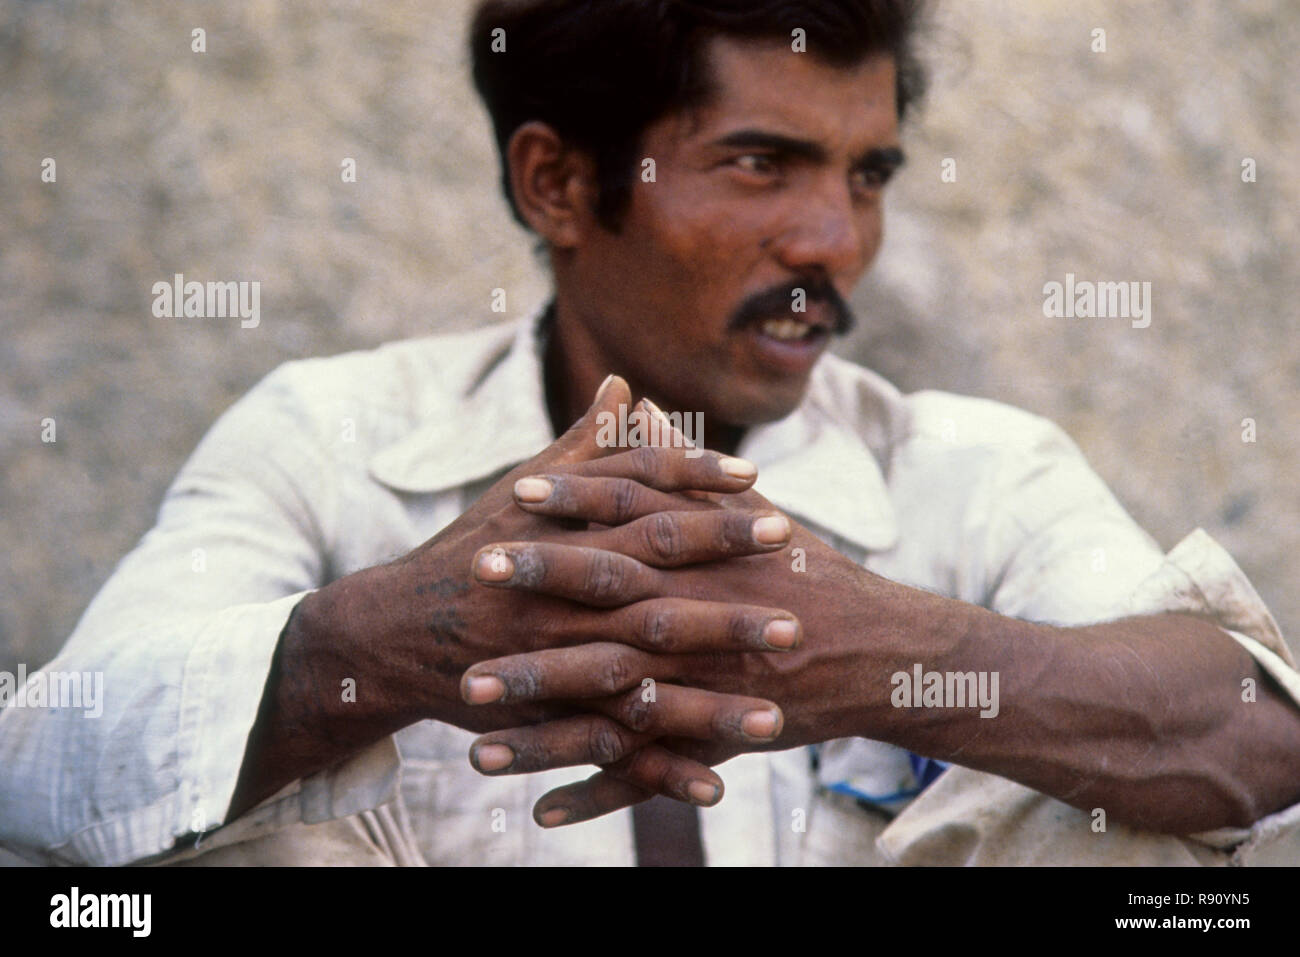 Man Showing Six Fingers, Photo Feature, india Stock Photo